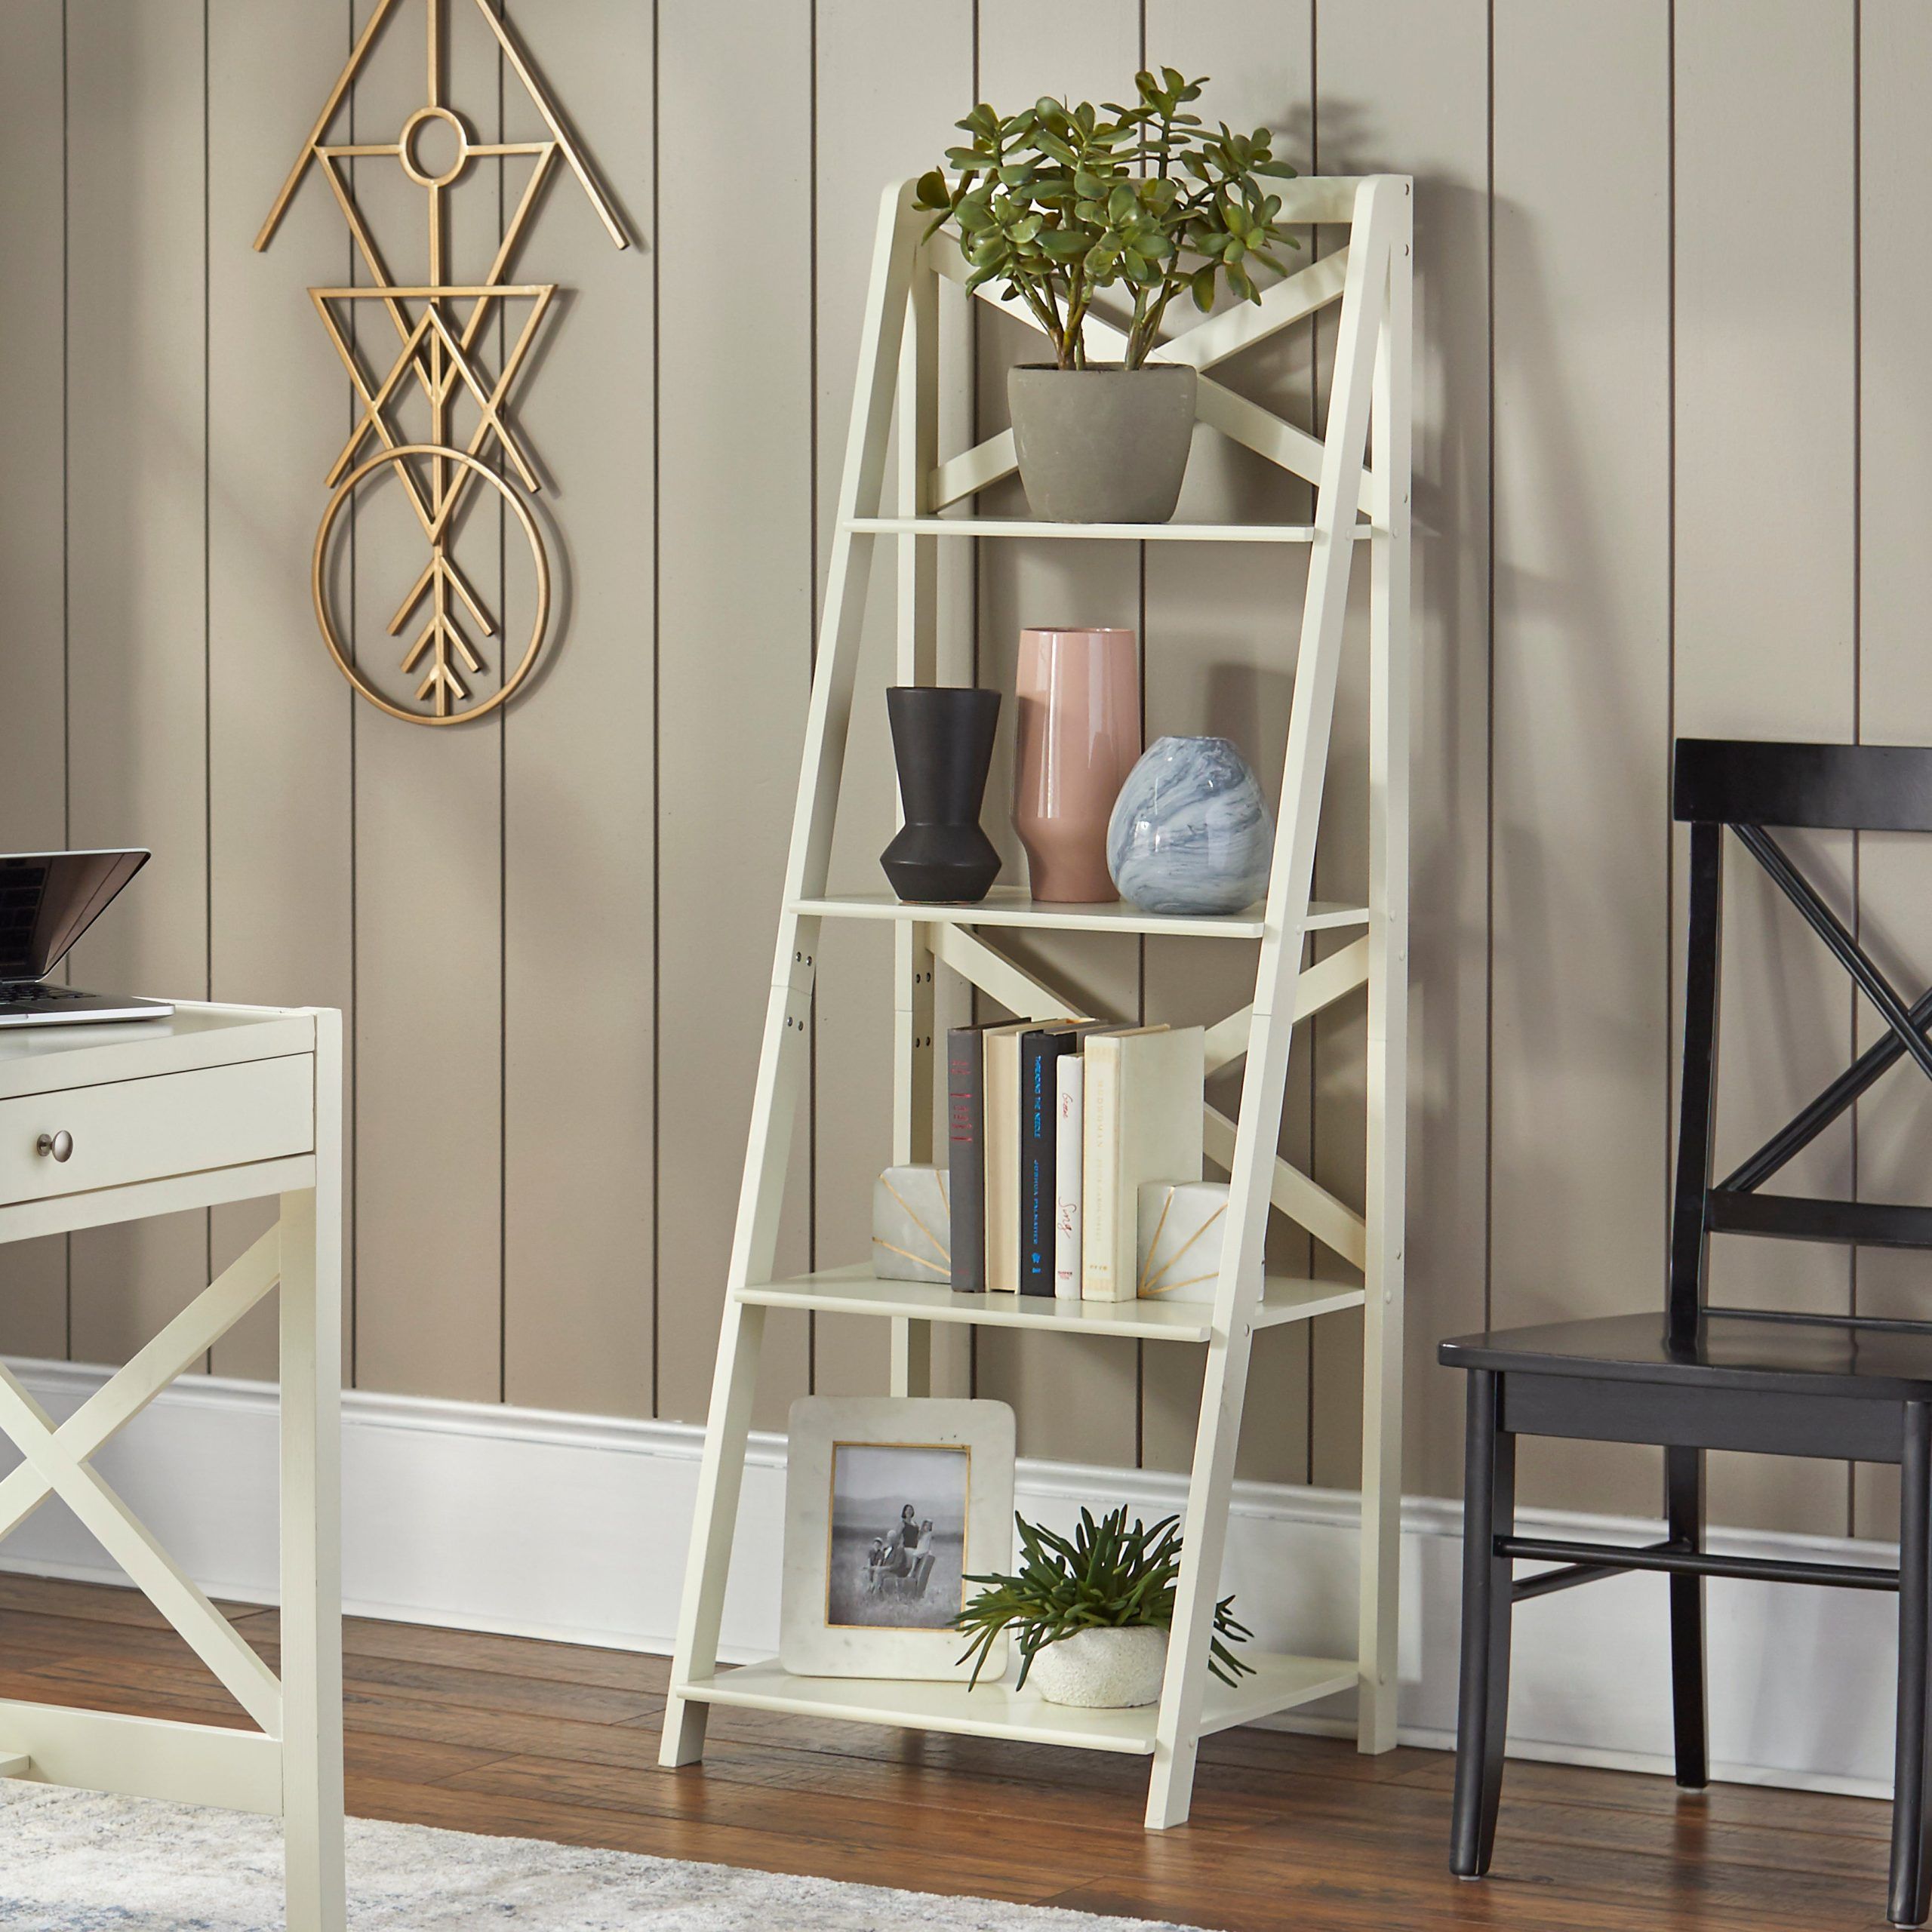 Simple Living Farmhouse 4 Tier Shelf – Overstock – 9283932 With Regard To Four Tier Bookcases (View 11 of 15)